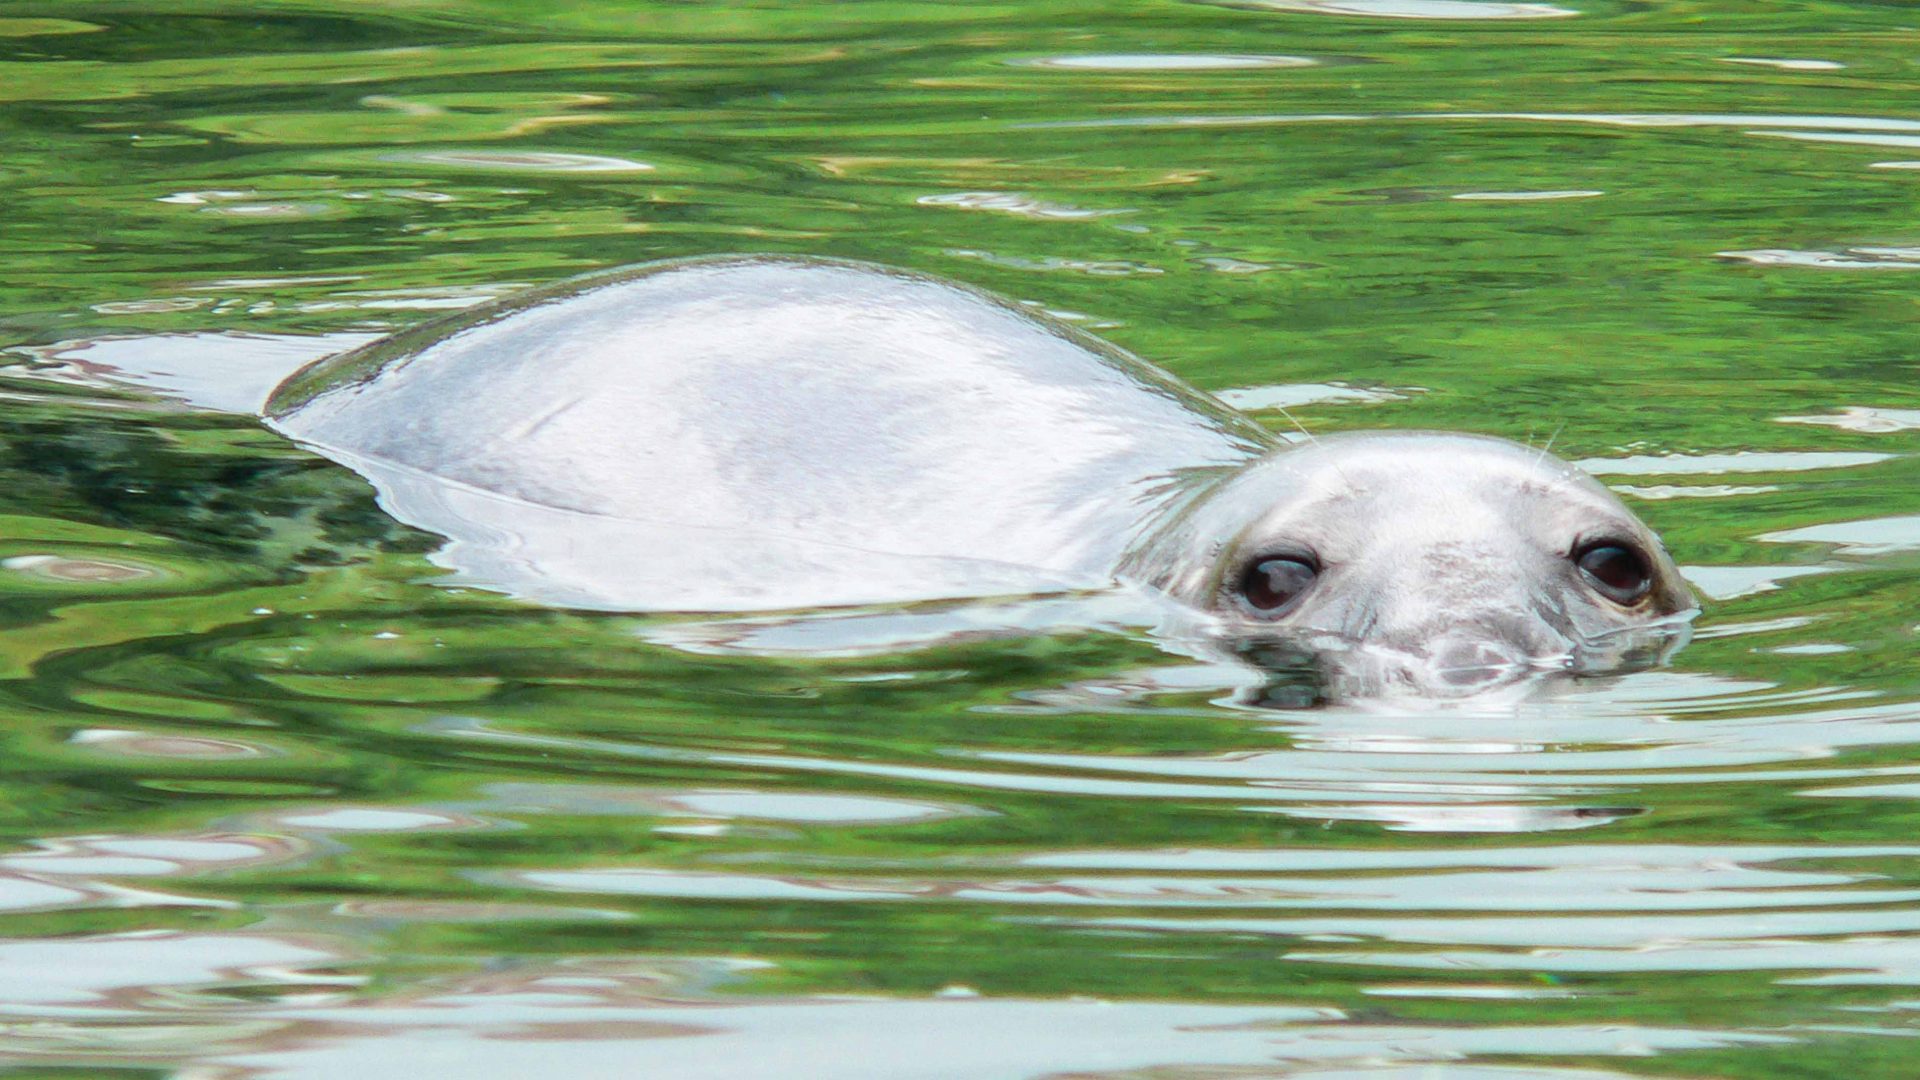 A seal pokes its head from the water - just part of the wonderful wildlife you'll likely come across while coasteering in Wales.